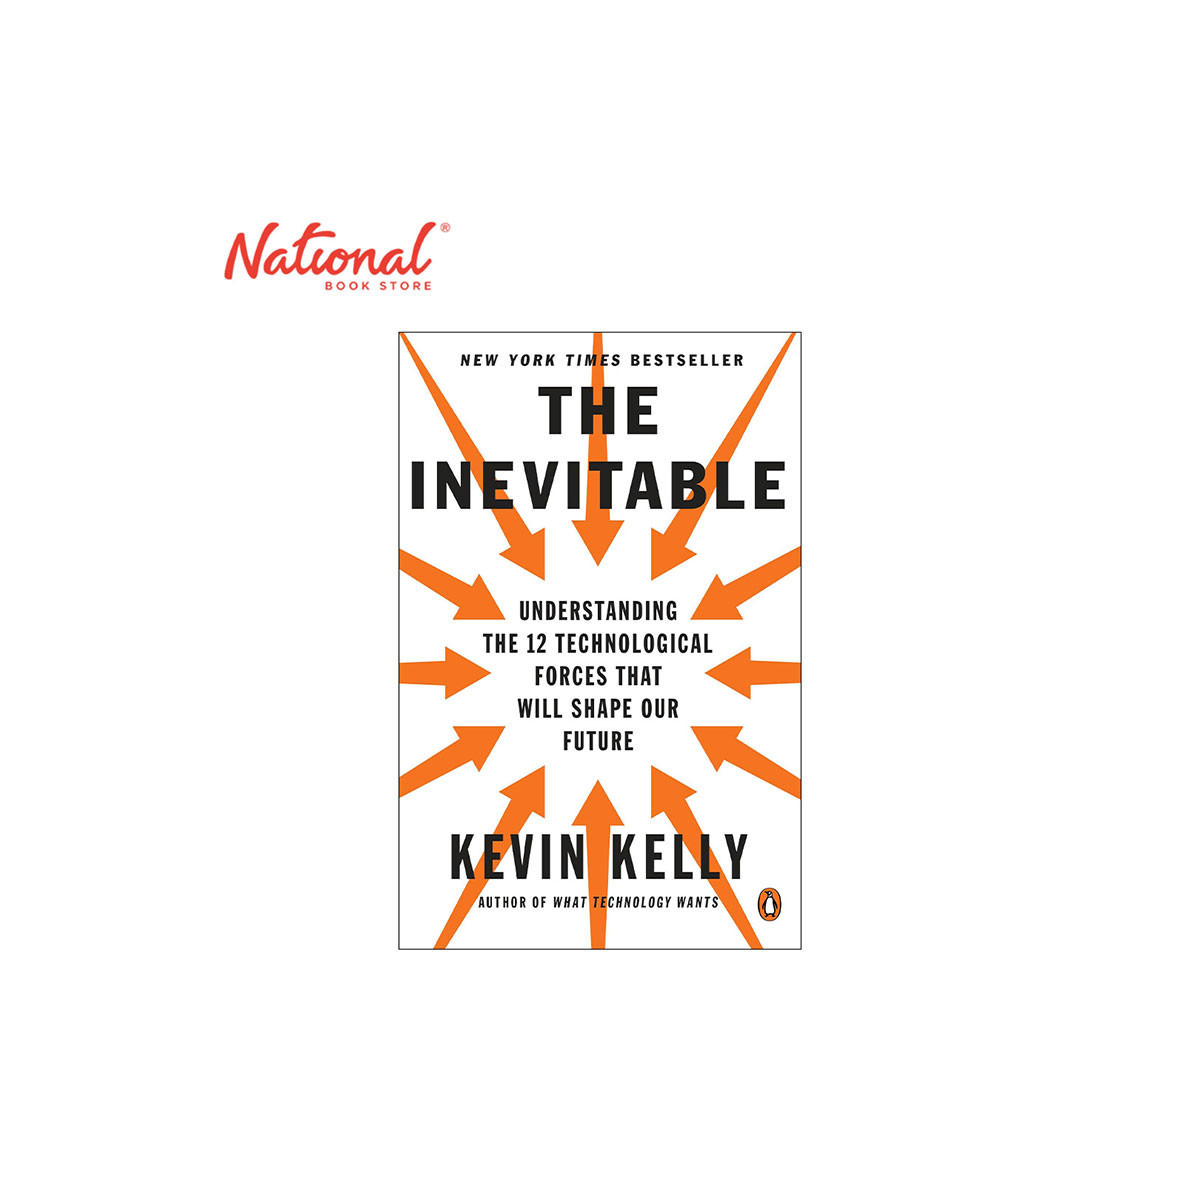 The Inevitable: Understanding the 12 Technological Forces That Will Shape Our Future by Kevin Kelly